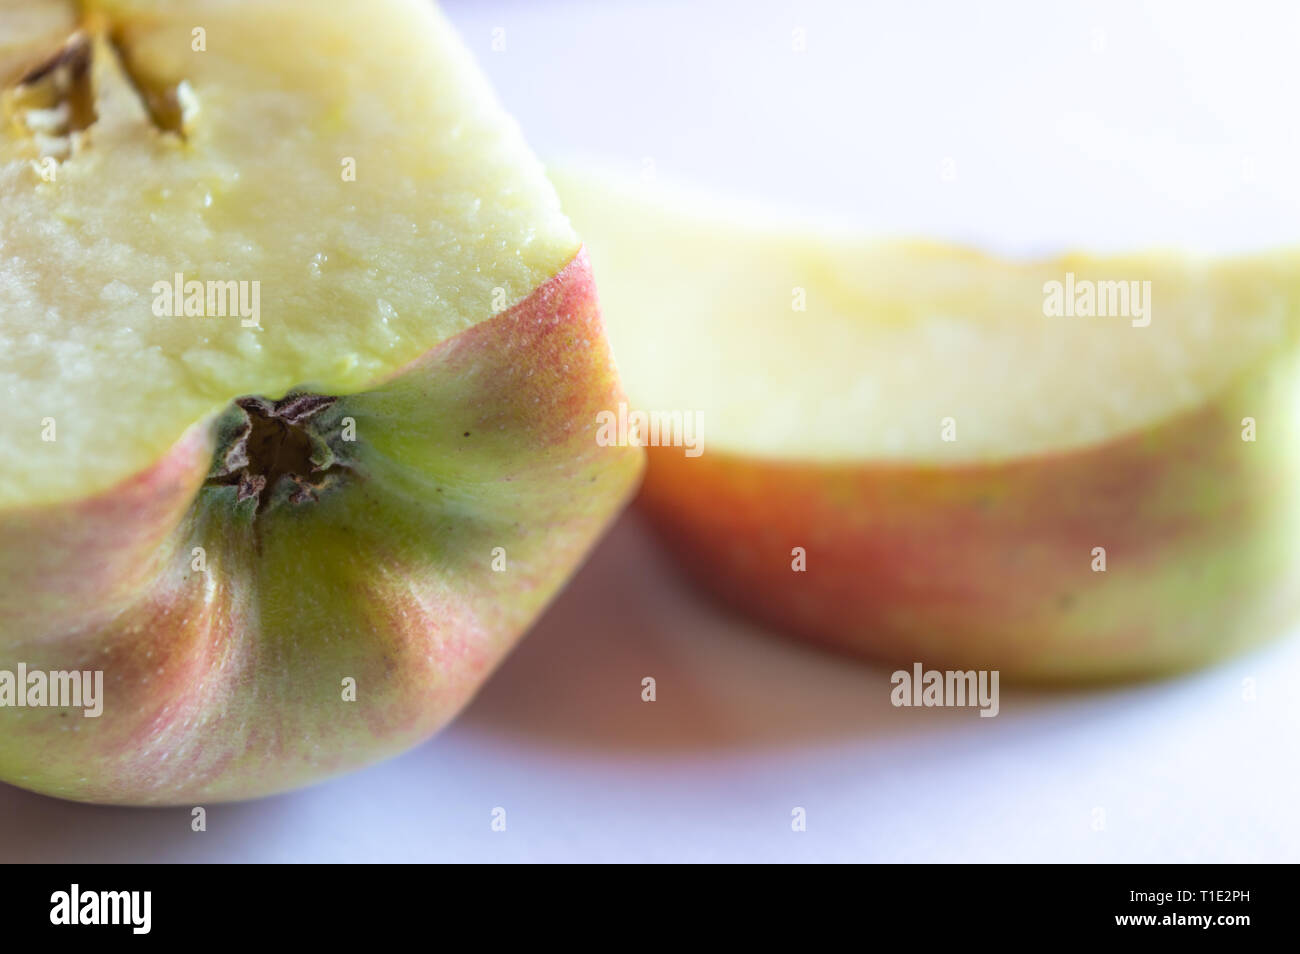 A half apple with an apple slice shallow depth of view Stock Photo